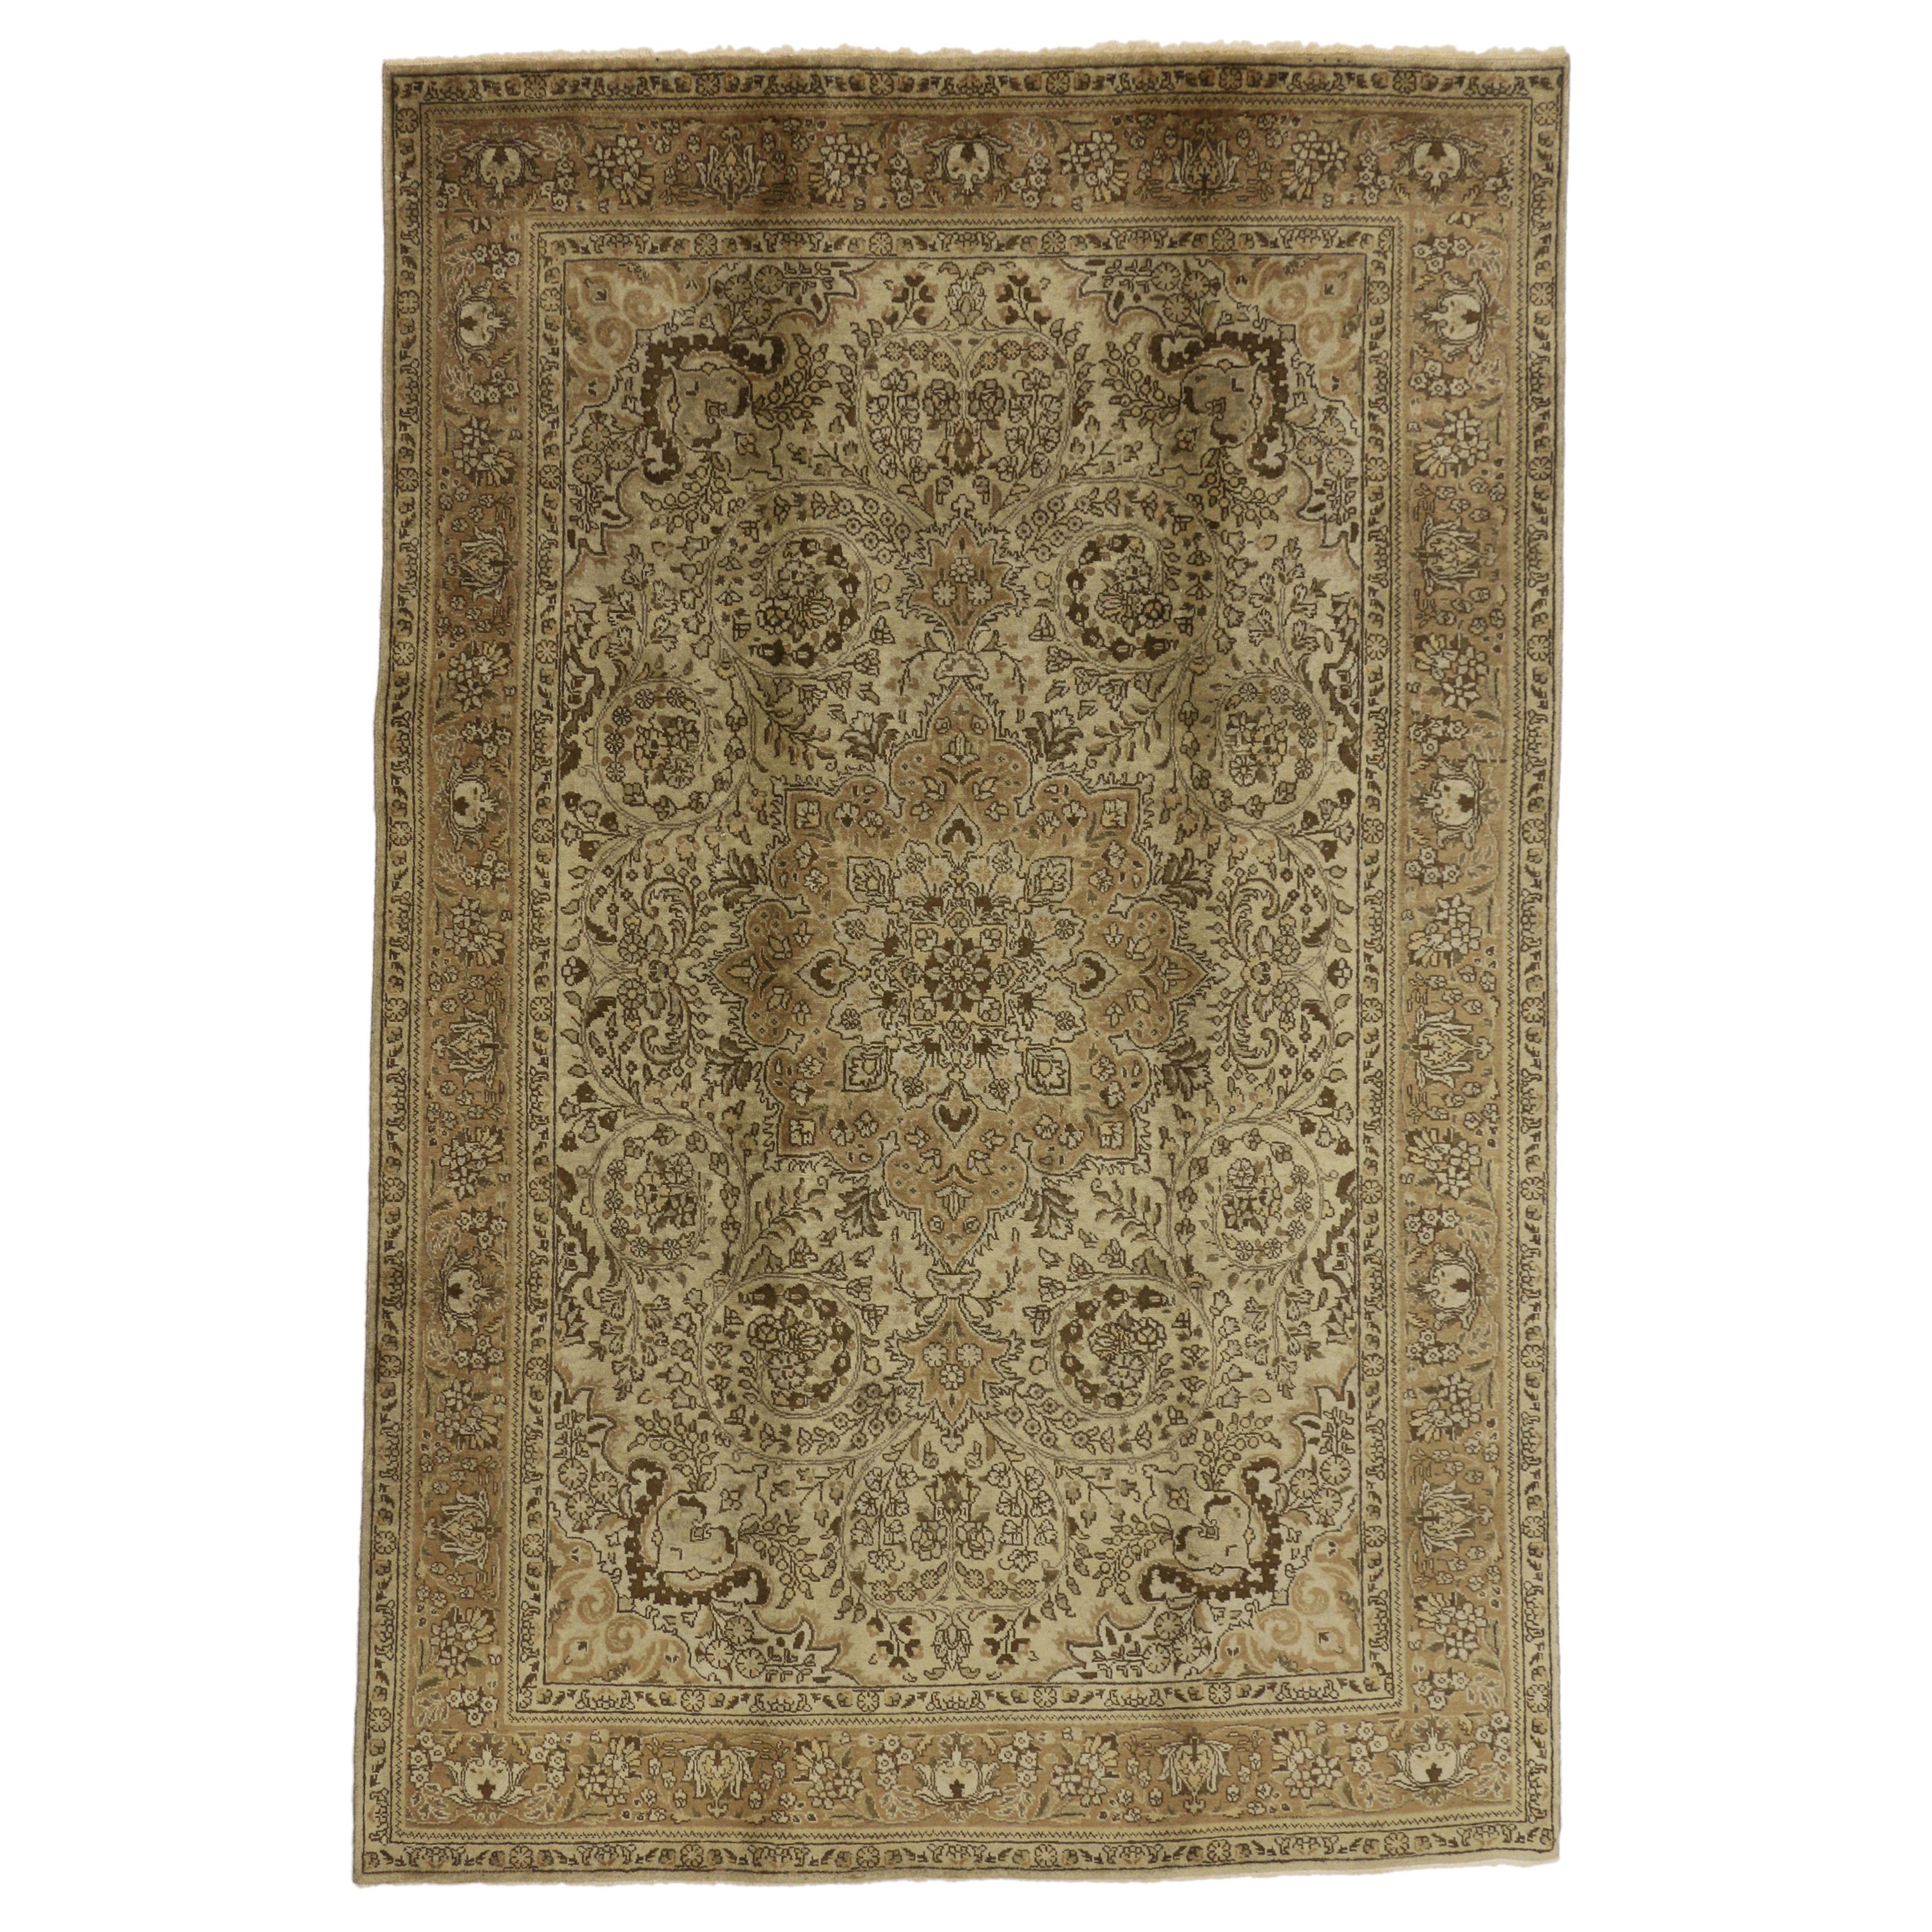 Vintage Persian Tabriz Rug with Neutral Colors